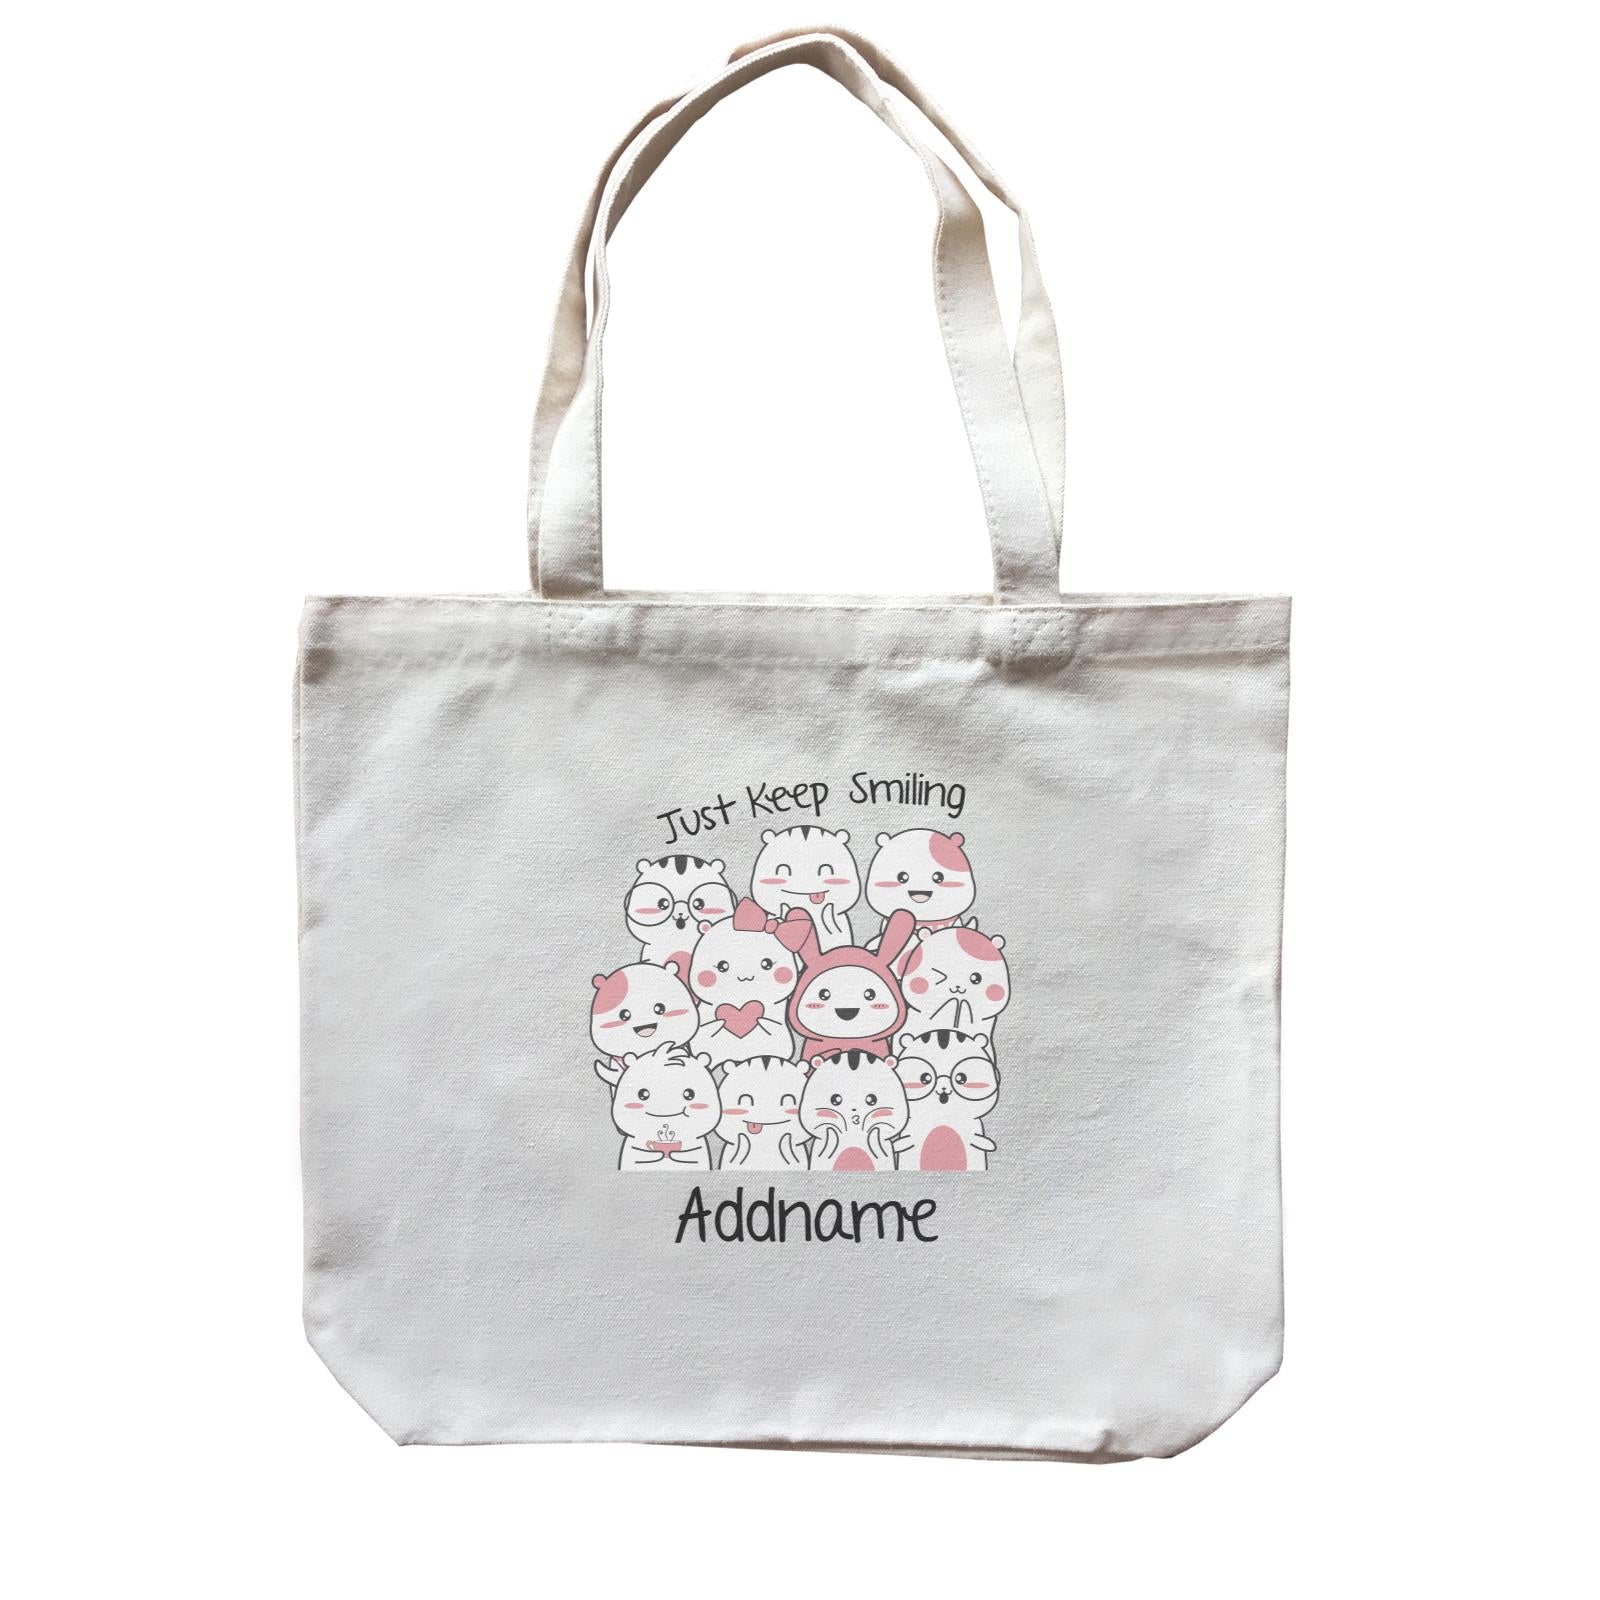 Cute Animals And Friends Series Cute Hamster Just Keep Smiling Addname Canvas Bag